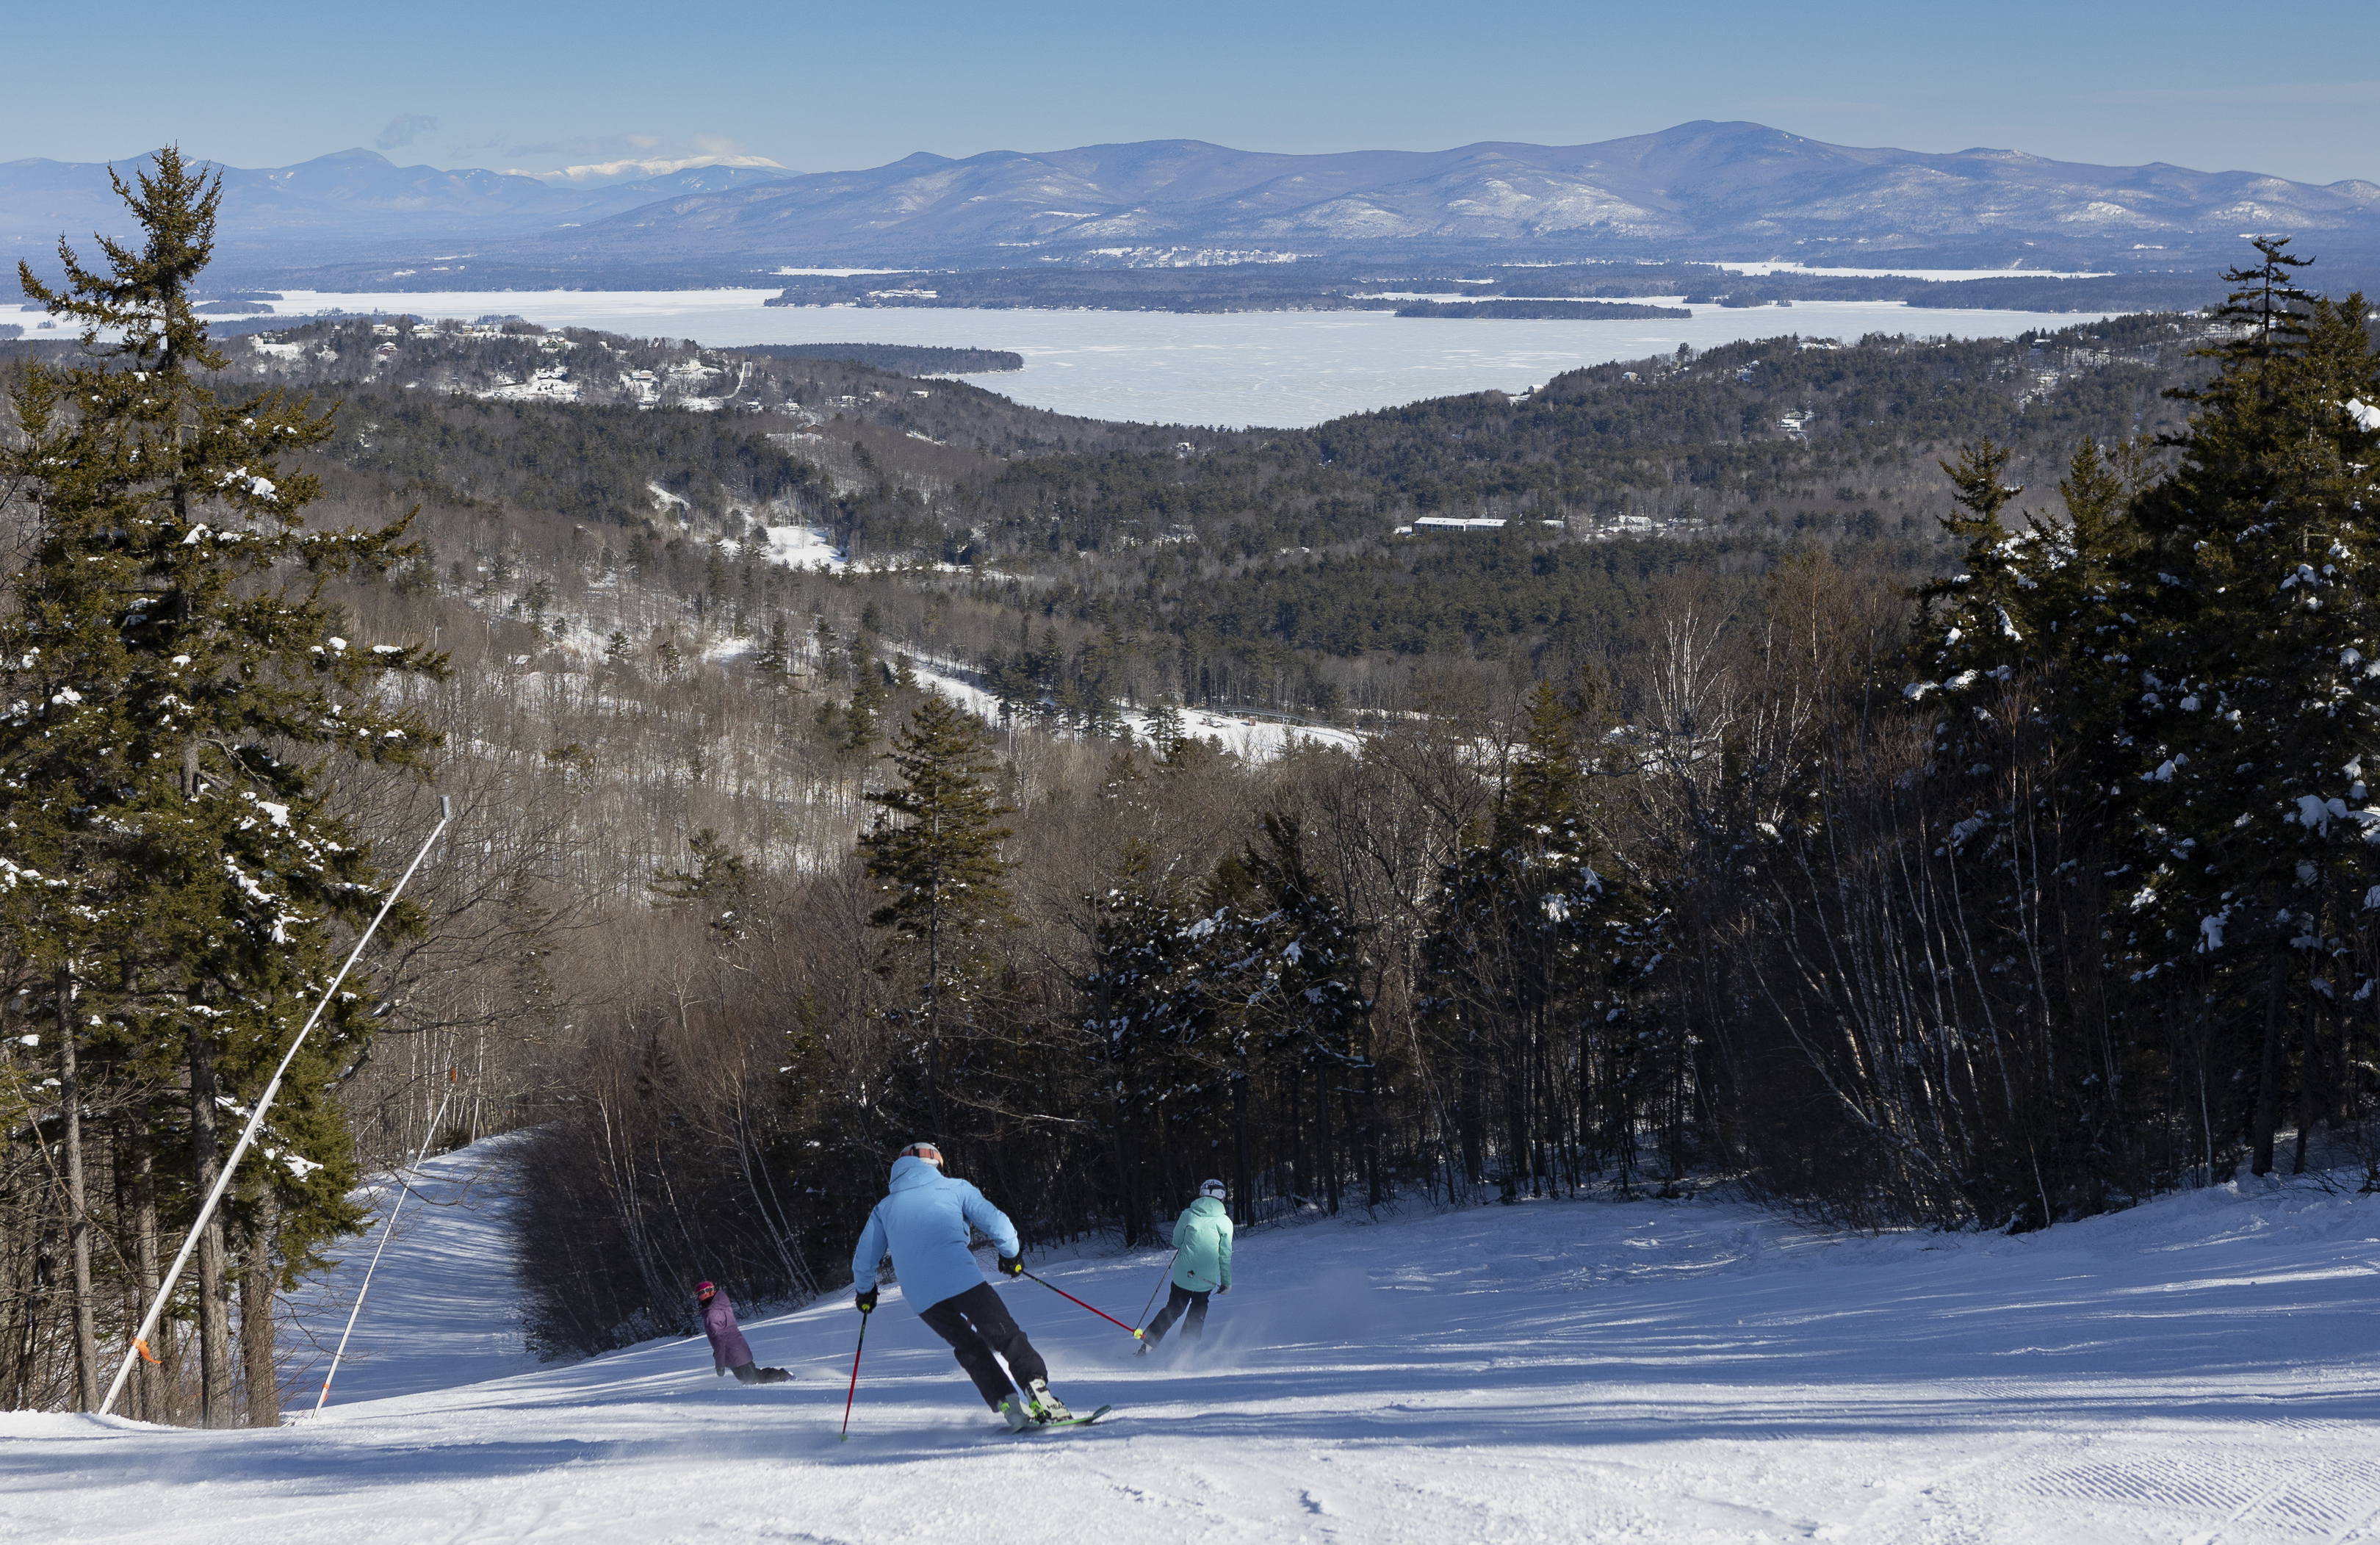 Skiing and riding on 40 trails with some of the State's best views.